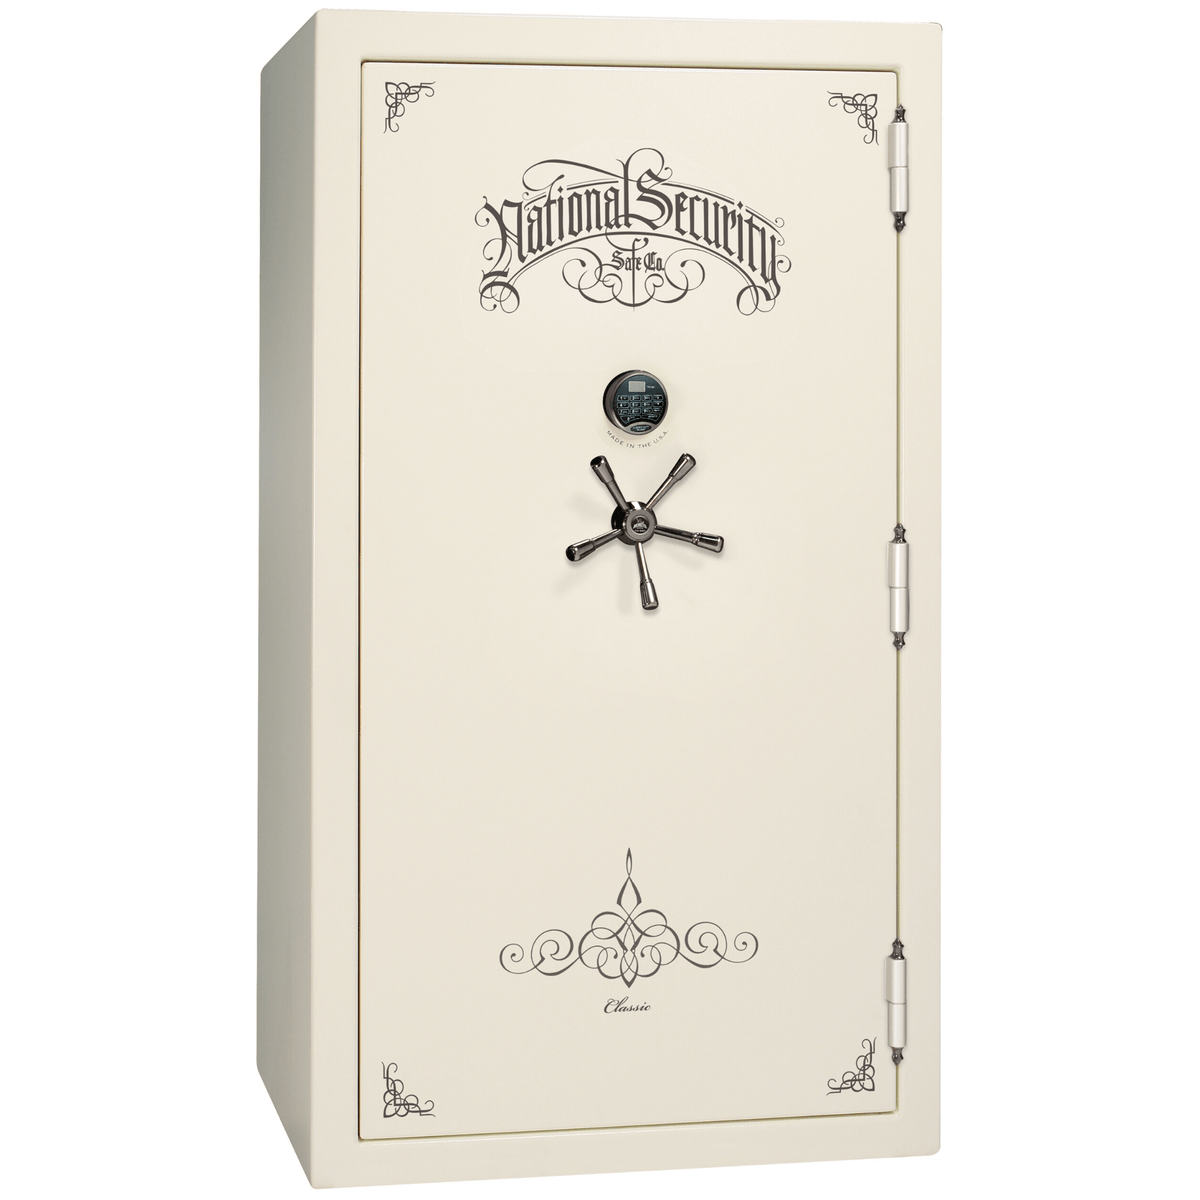 Liberty Safe Classic Plus 50 in White Marble with Black Chrome Electronic Lock, closed door.